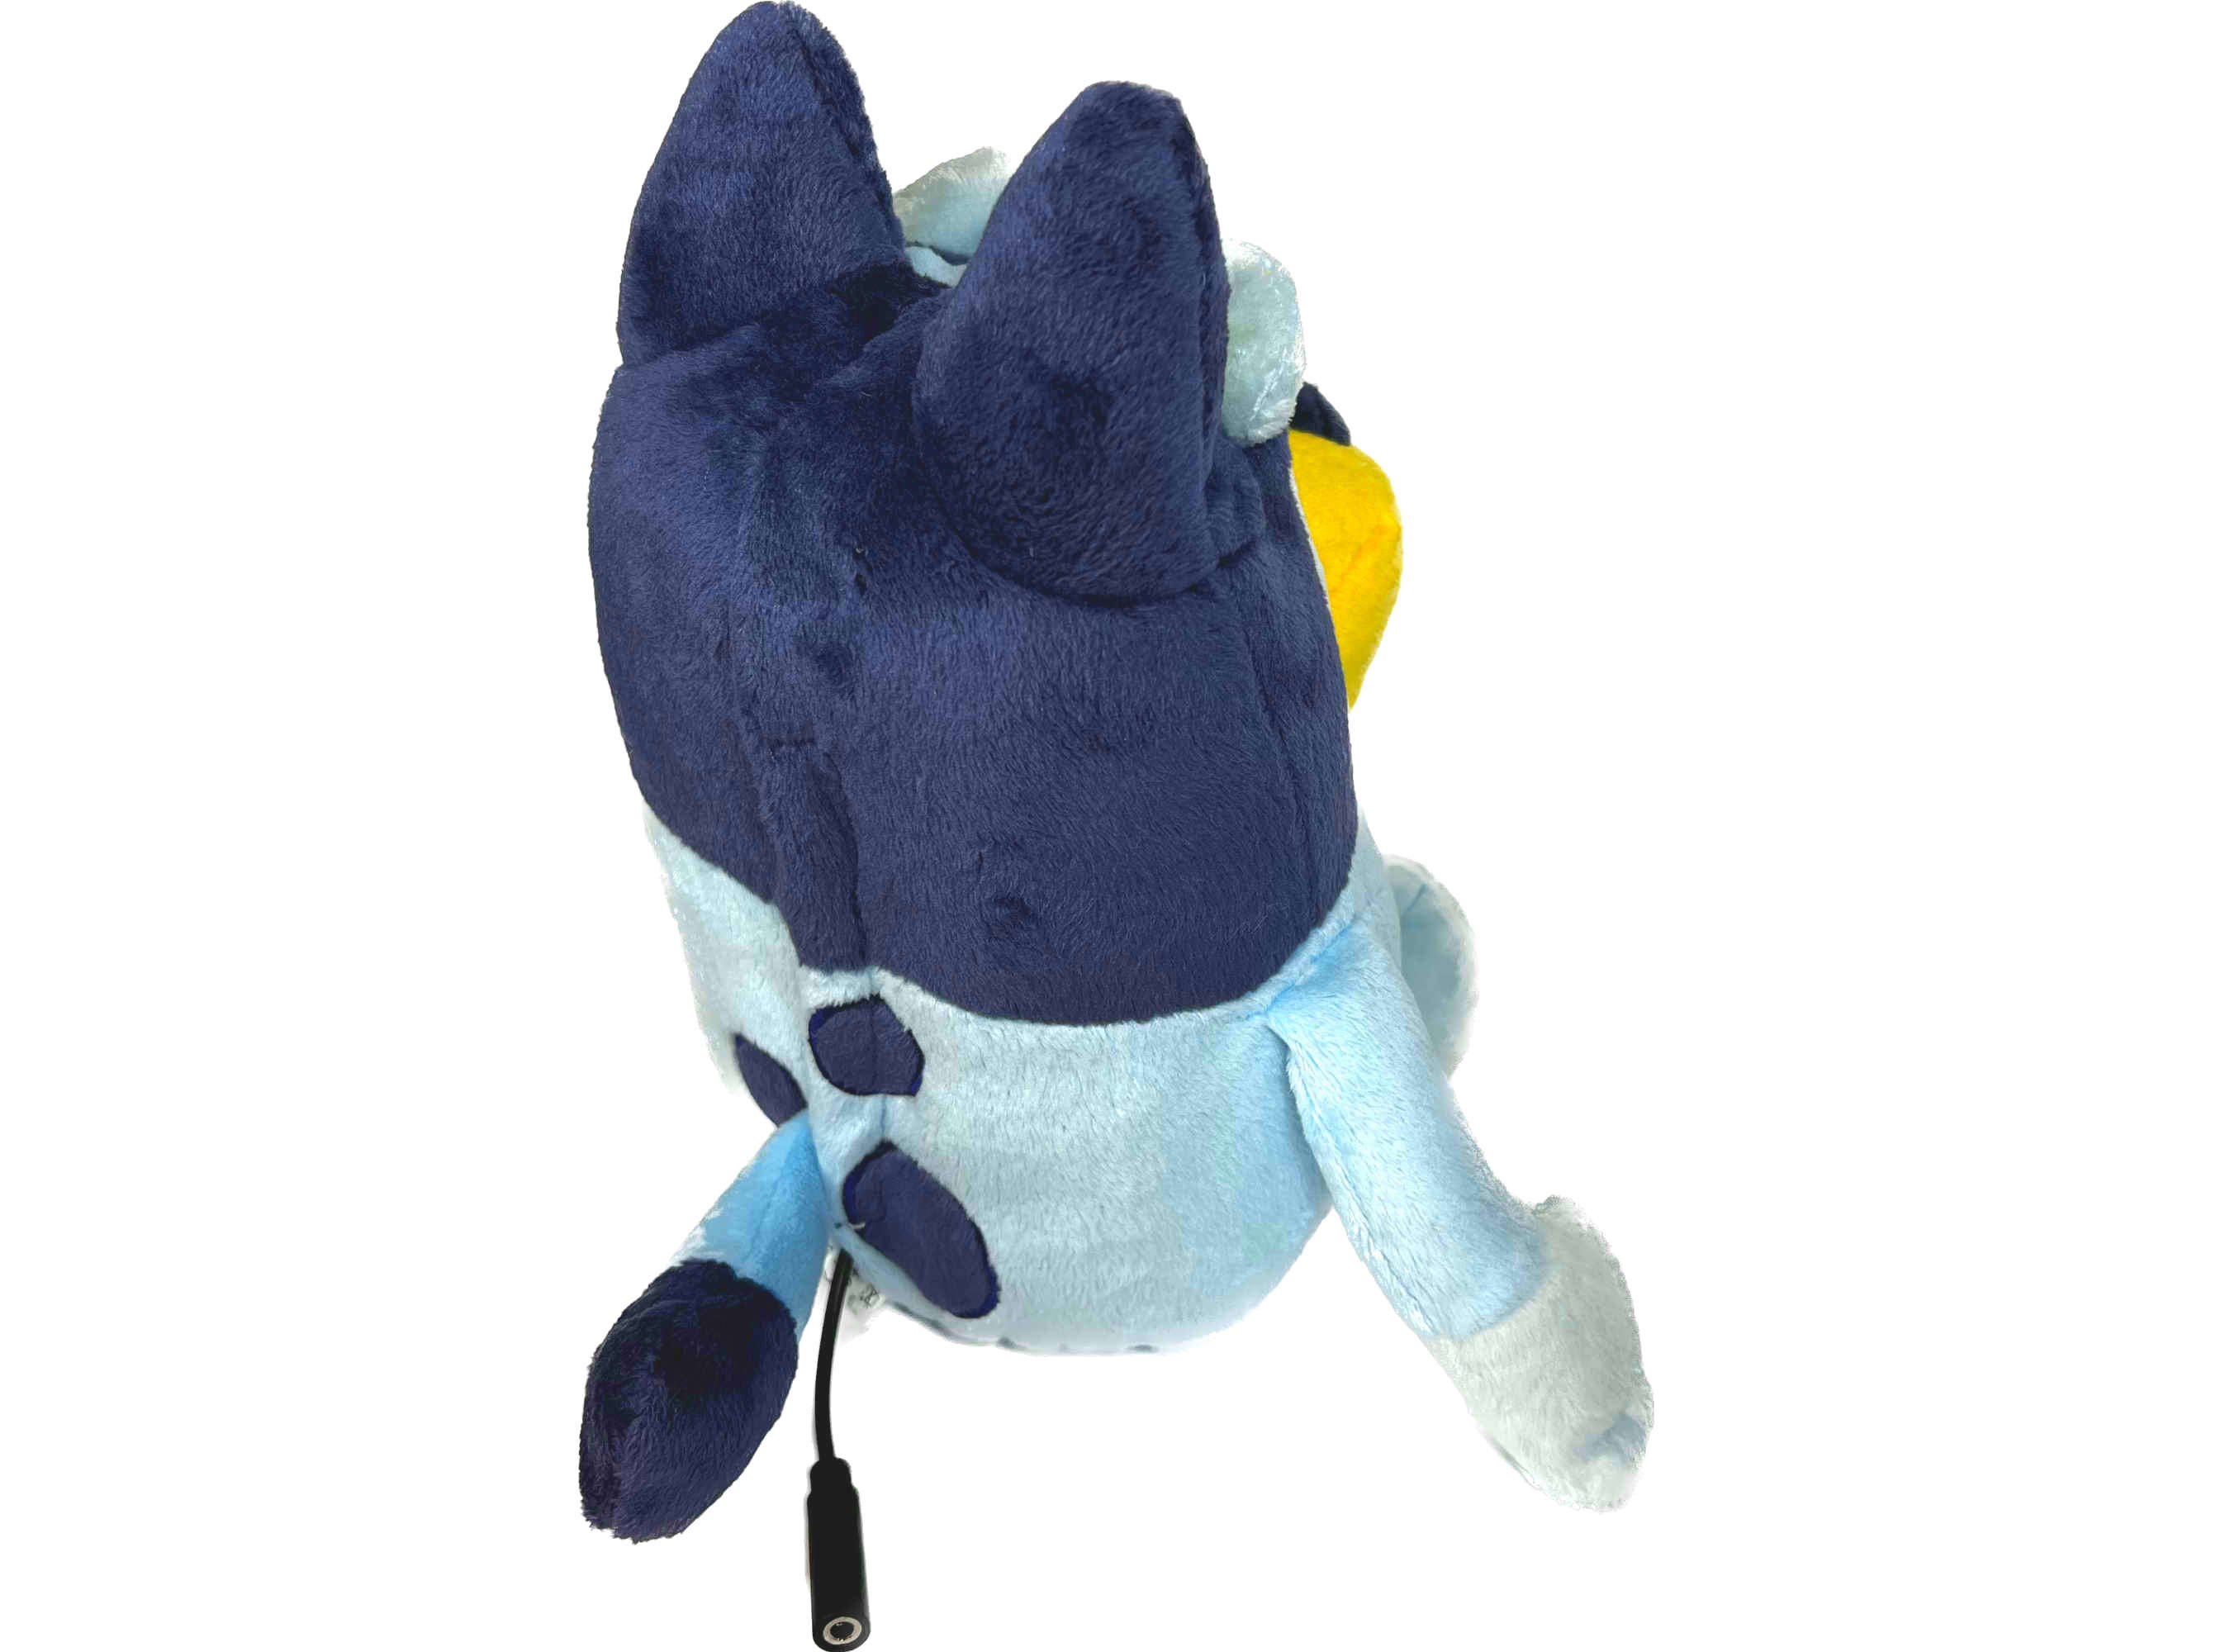 Switch Adapted Talking Bluey Plush Toy Adapted Toy Speech Therapy